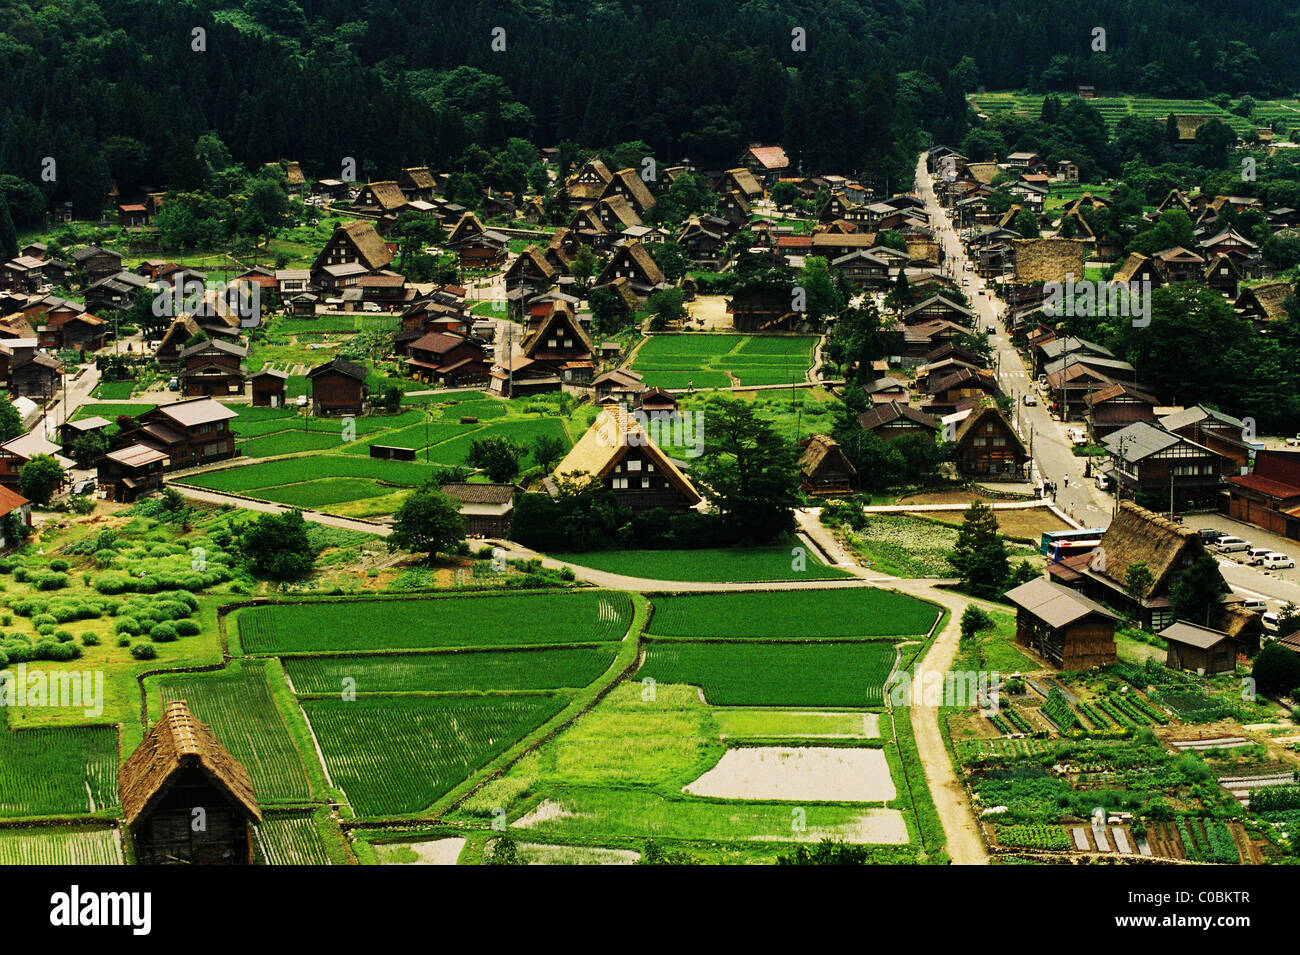 The traditional gassho-zukuri thatched roofs of the village of Shirakawago are dotted amidst rice paddies in mountainous Gifu. Stock Photo